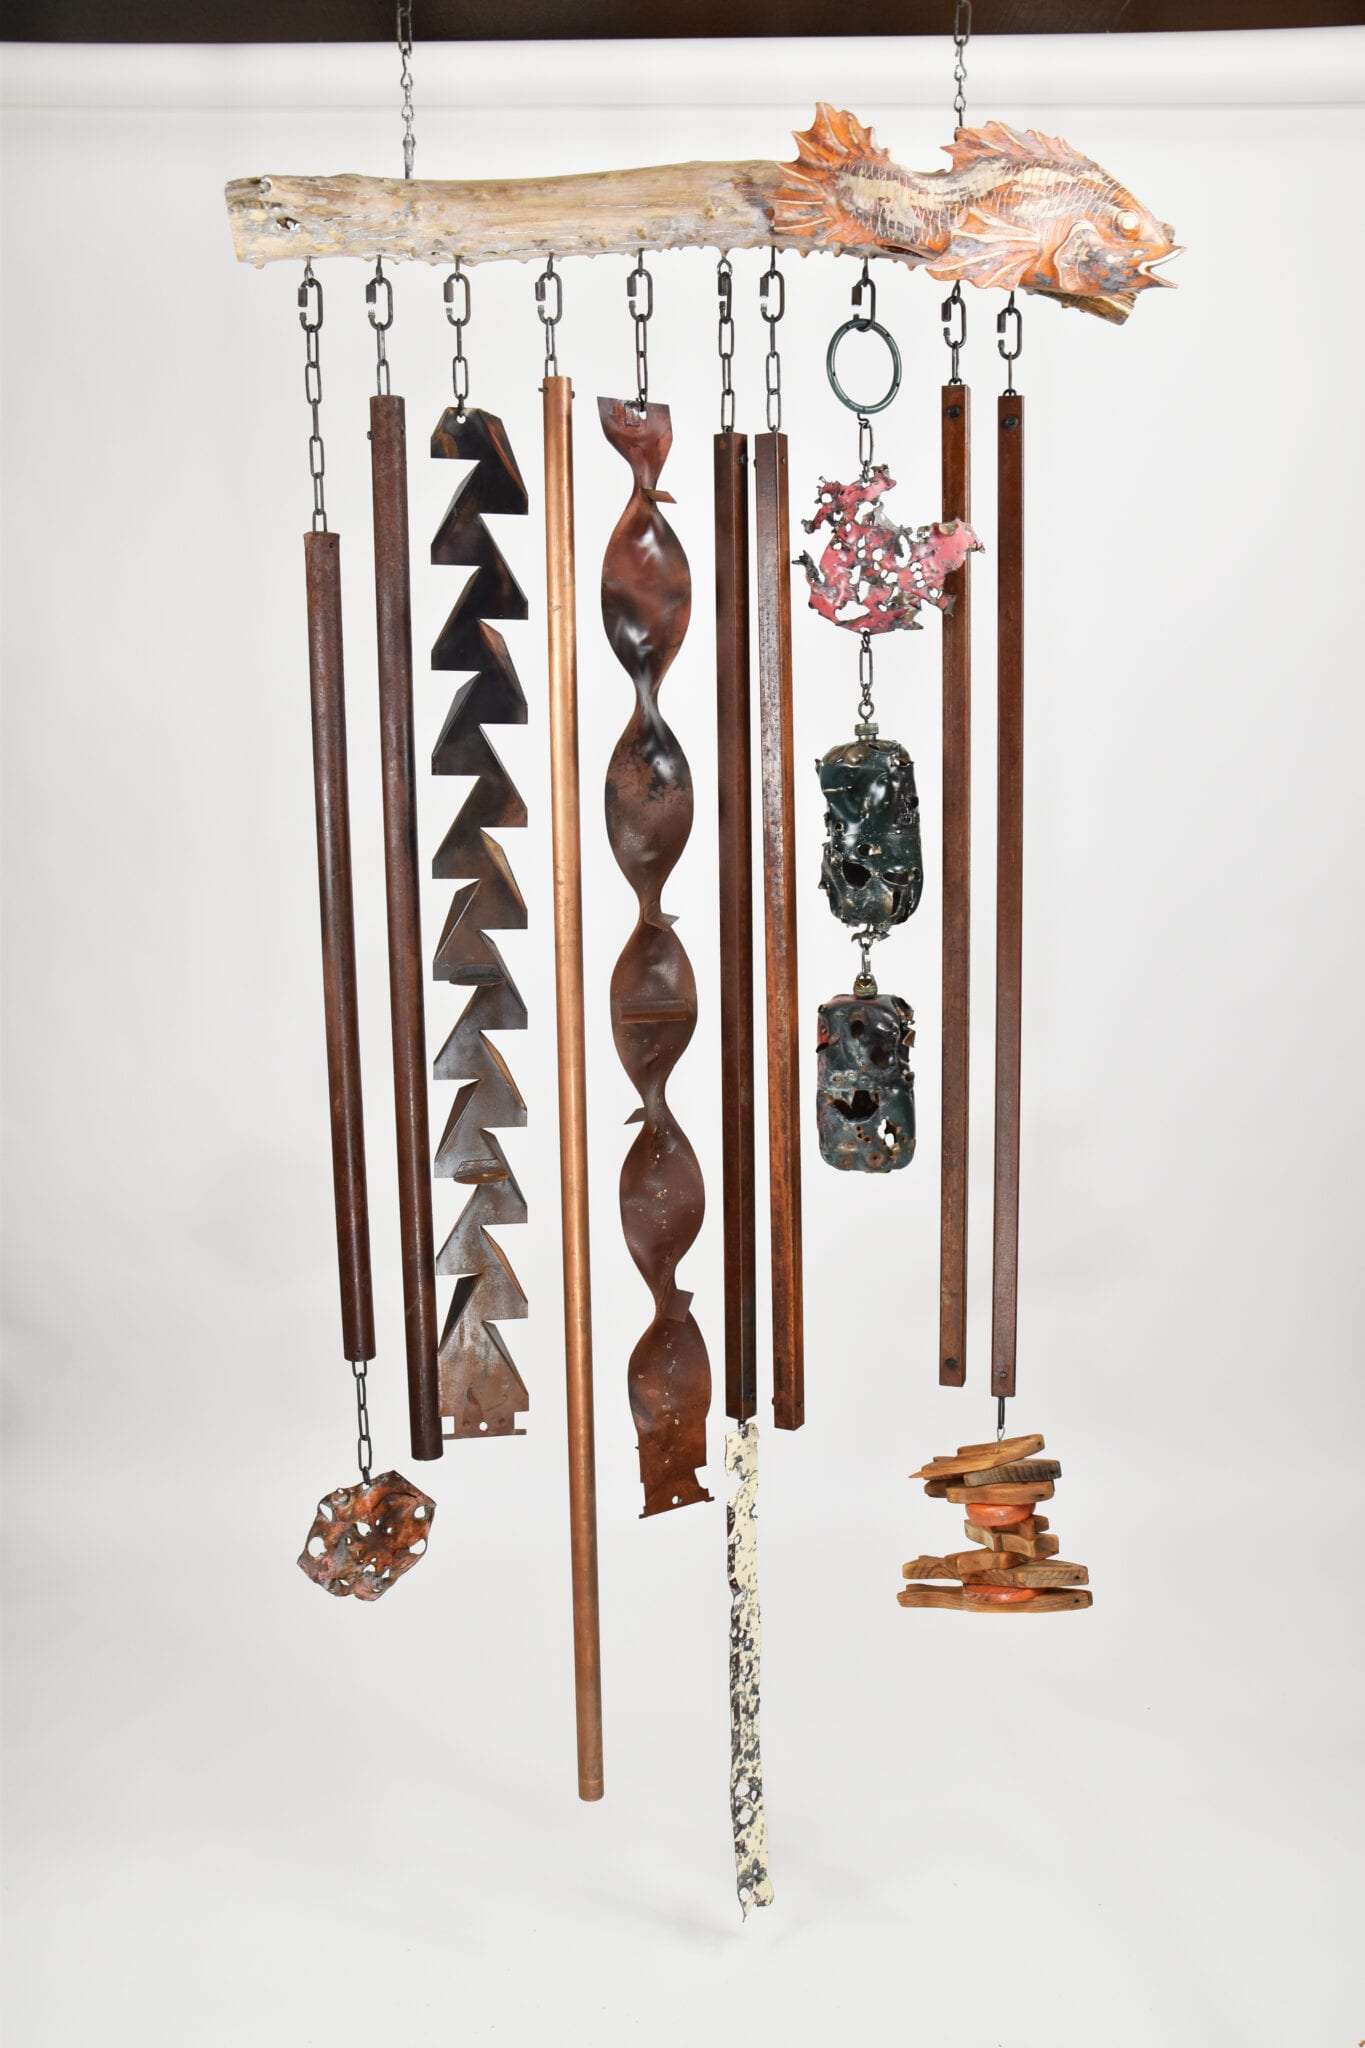 A Giant Wind Chime Art